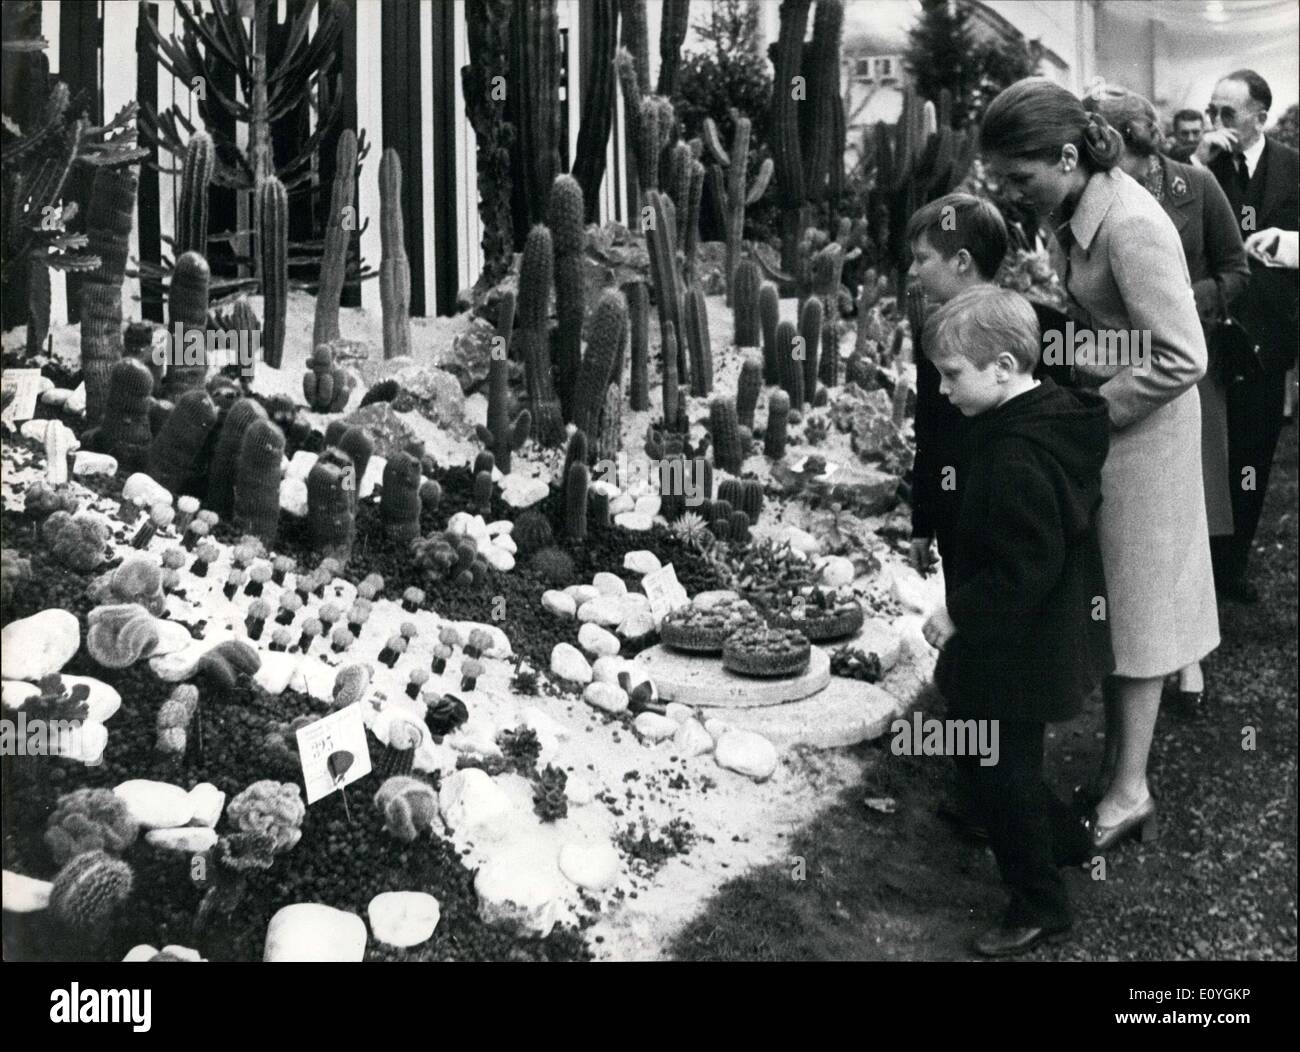 Apr. 29, 1970 - This floral exposition, which was recently inaugurated by King Baudouin and Queen Fabiola, contains flowers from more than 20 countries. It is being held at the Palais des Sports in Ghent. Paola's sons are named Philippe and Laurent. Stock Photo